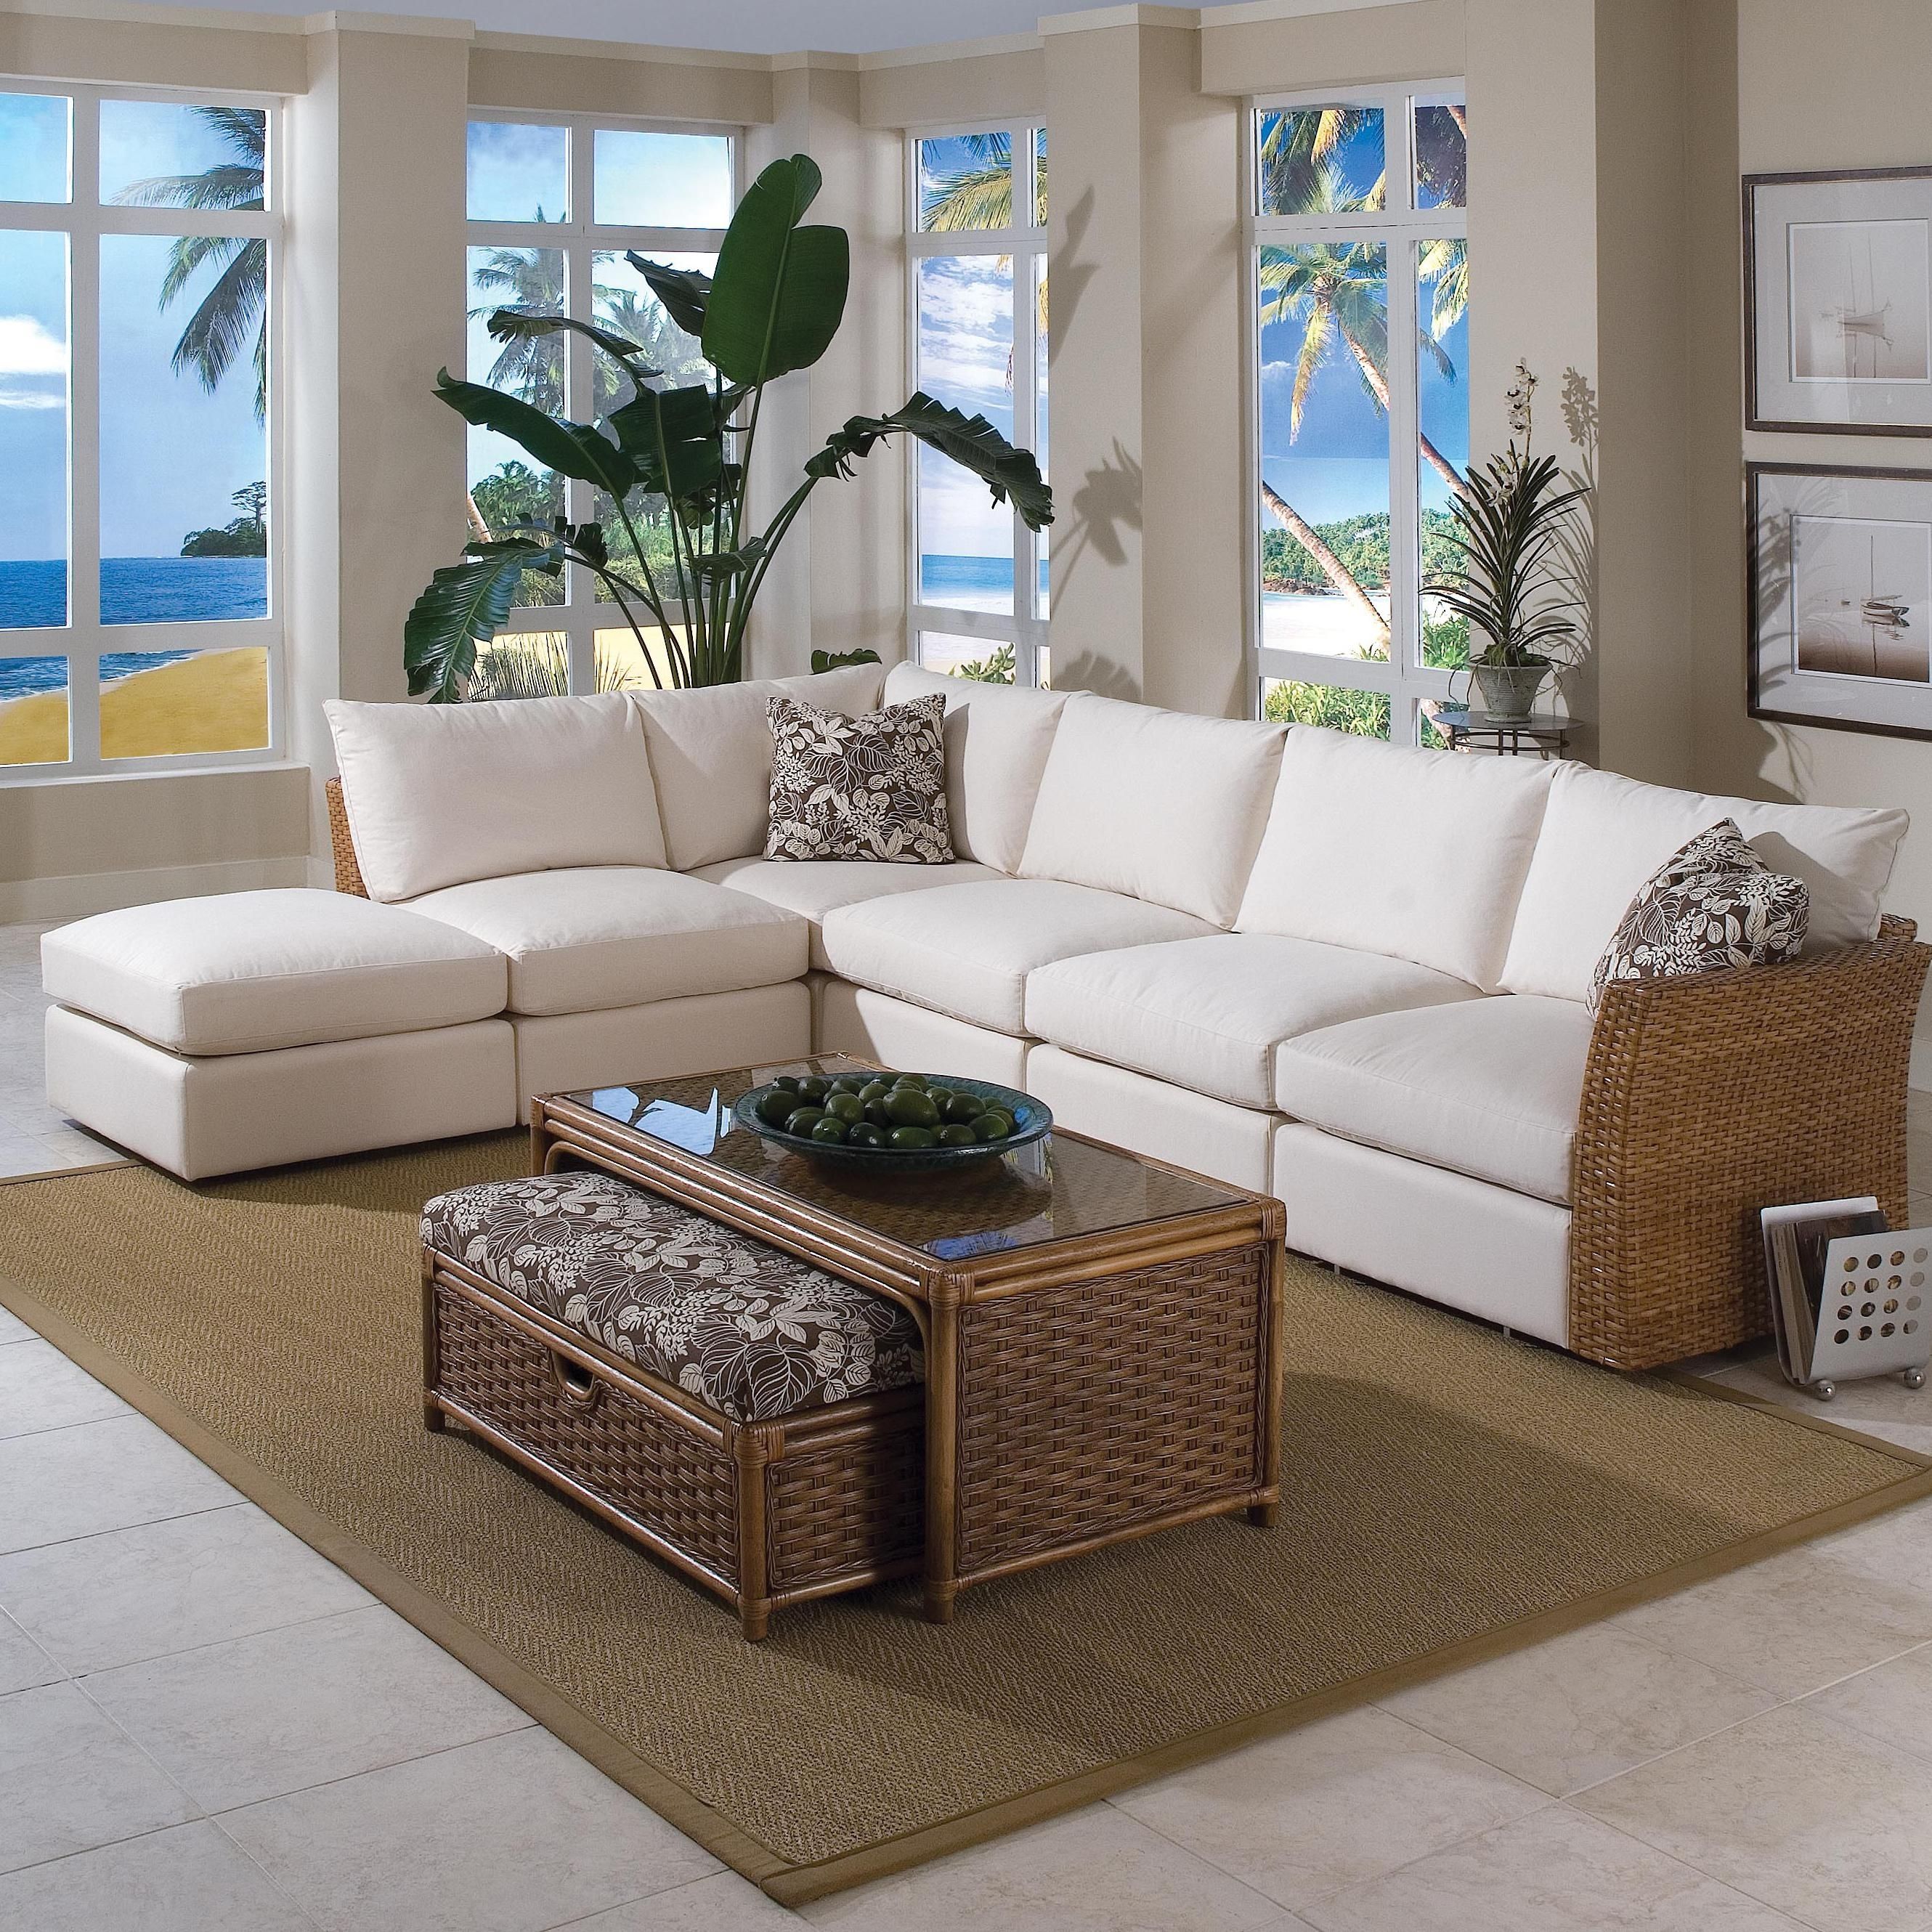 Braxton Culler Grand Water Point Tropical Sectional Sofa With Two With Regard To Sectional Sofas In Greenville Sc (View 1 of 10)